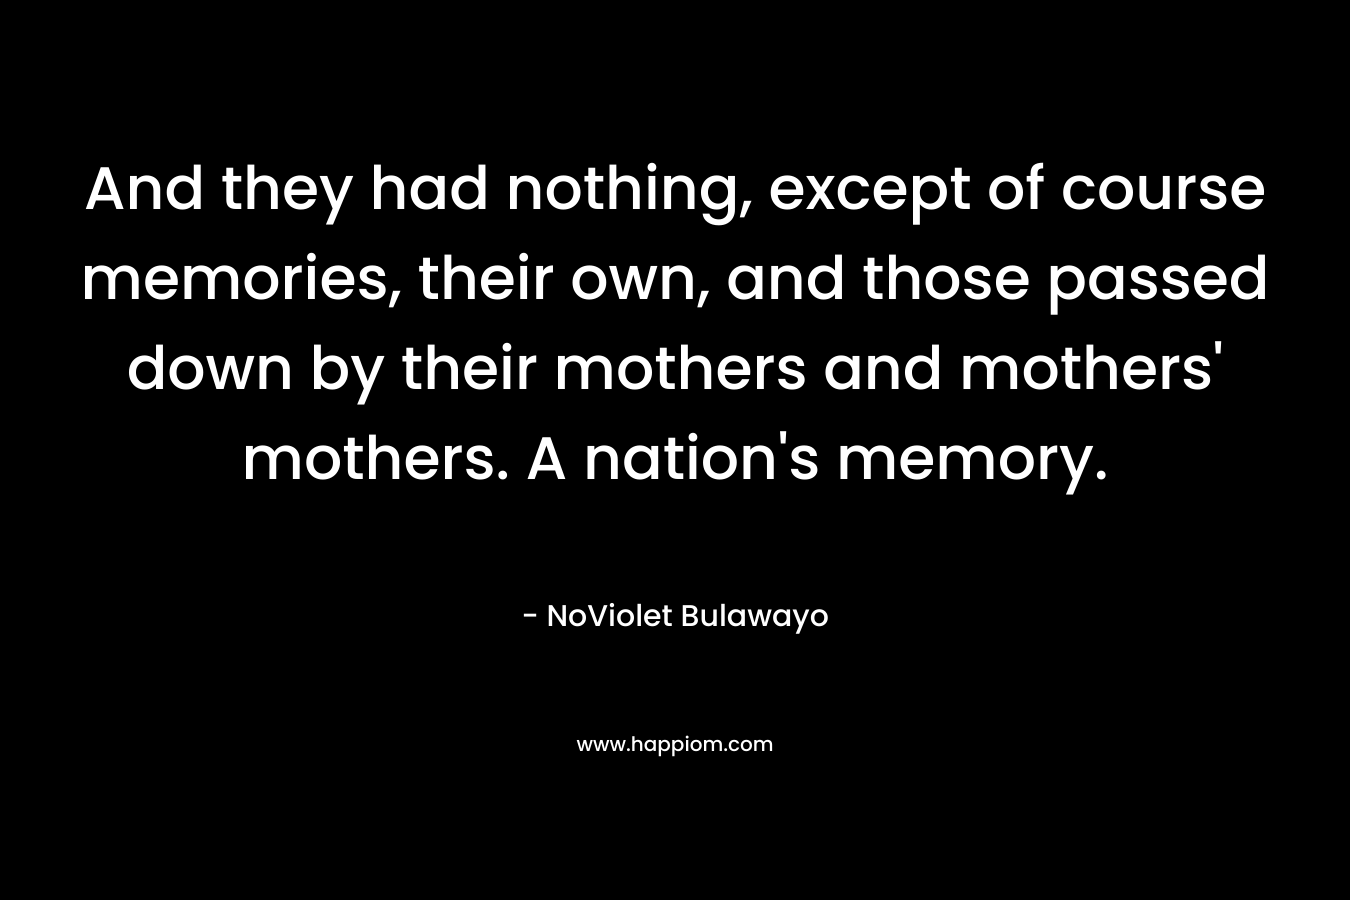 And they had nothing, except of course memories, their own, and those passed down by their mothers and mothers' mothers. A nation's memory.